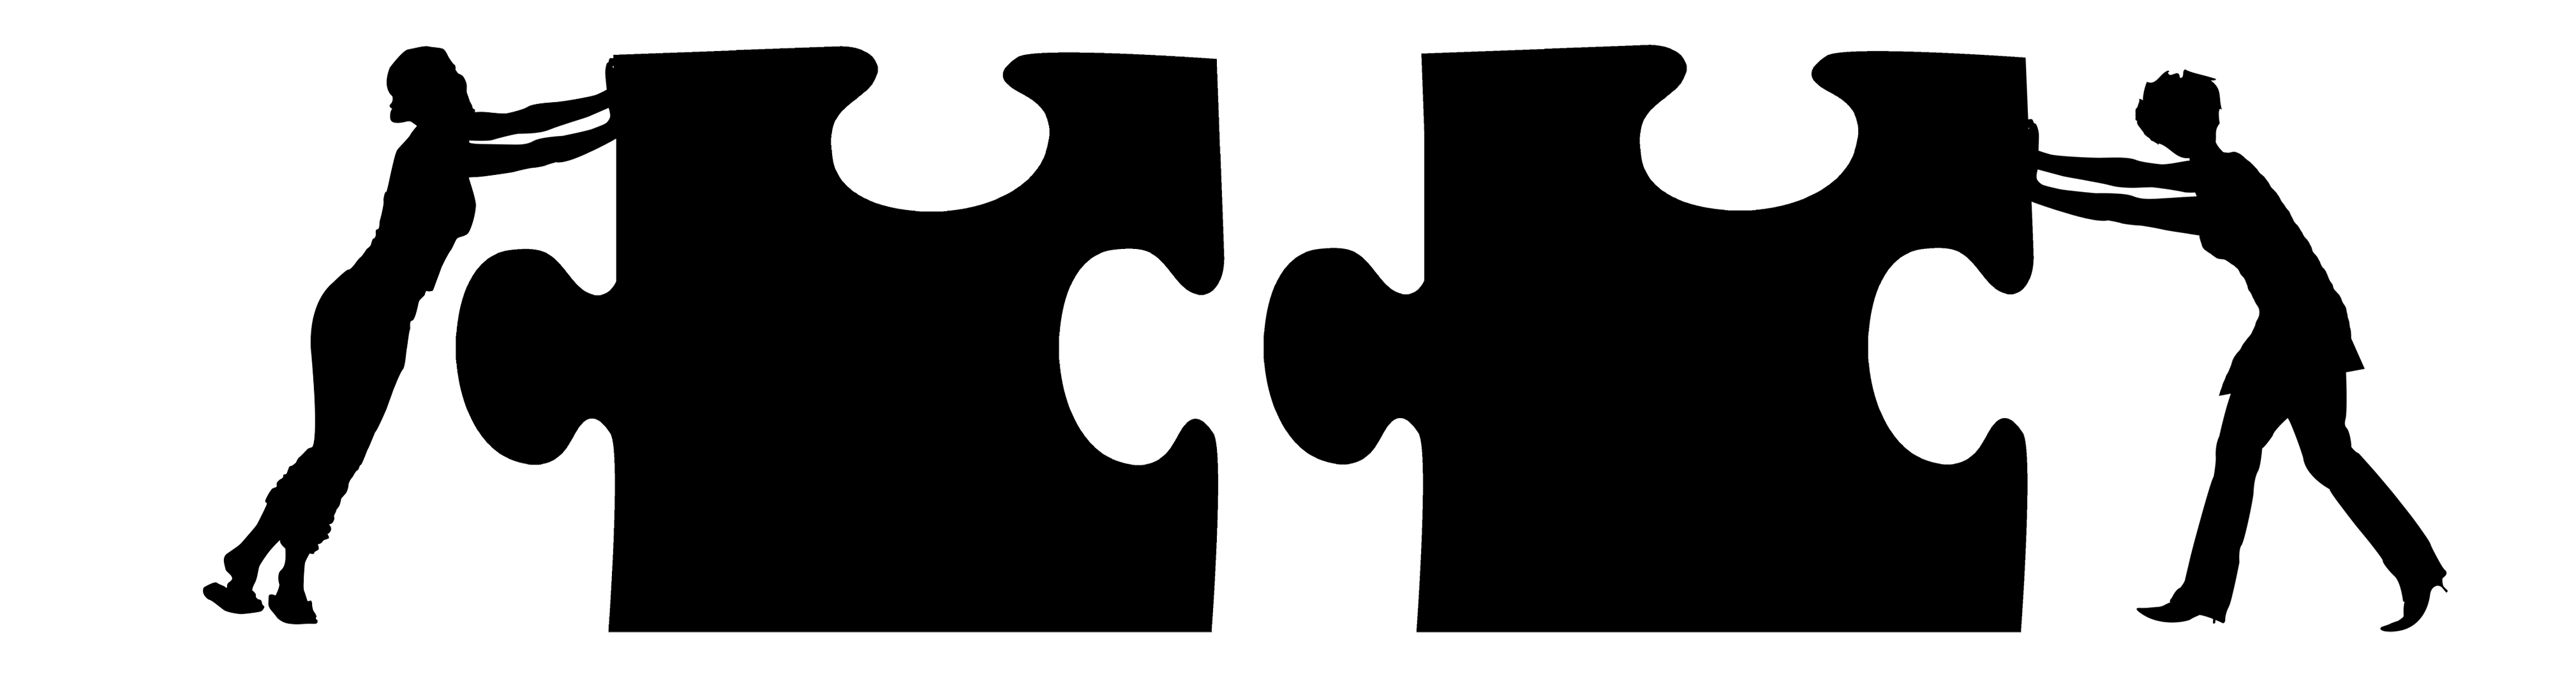 puzzle clipart interdependence